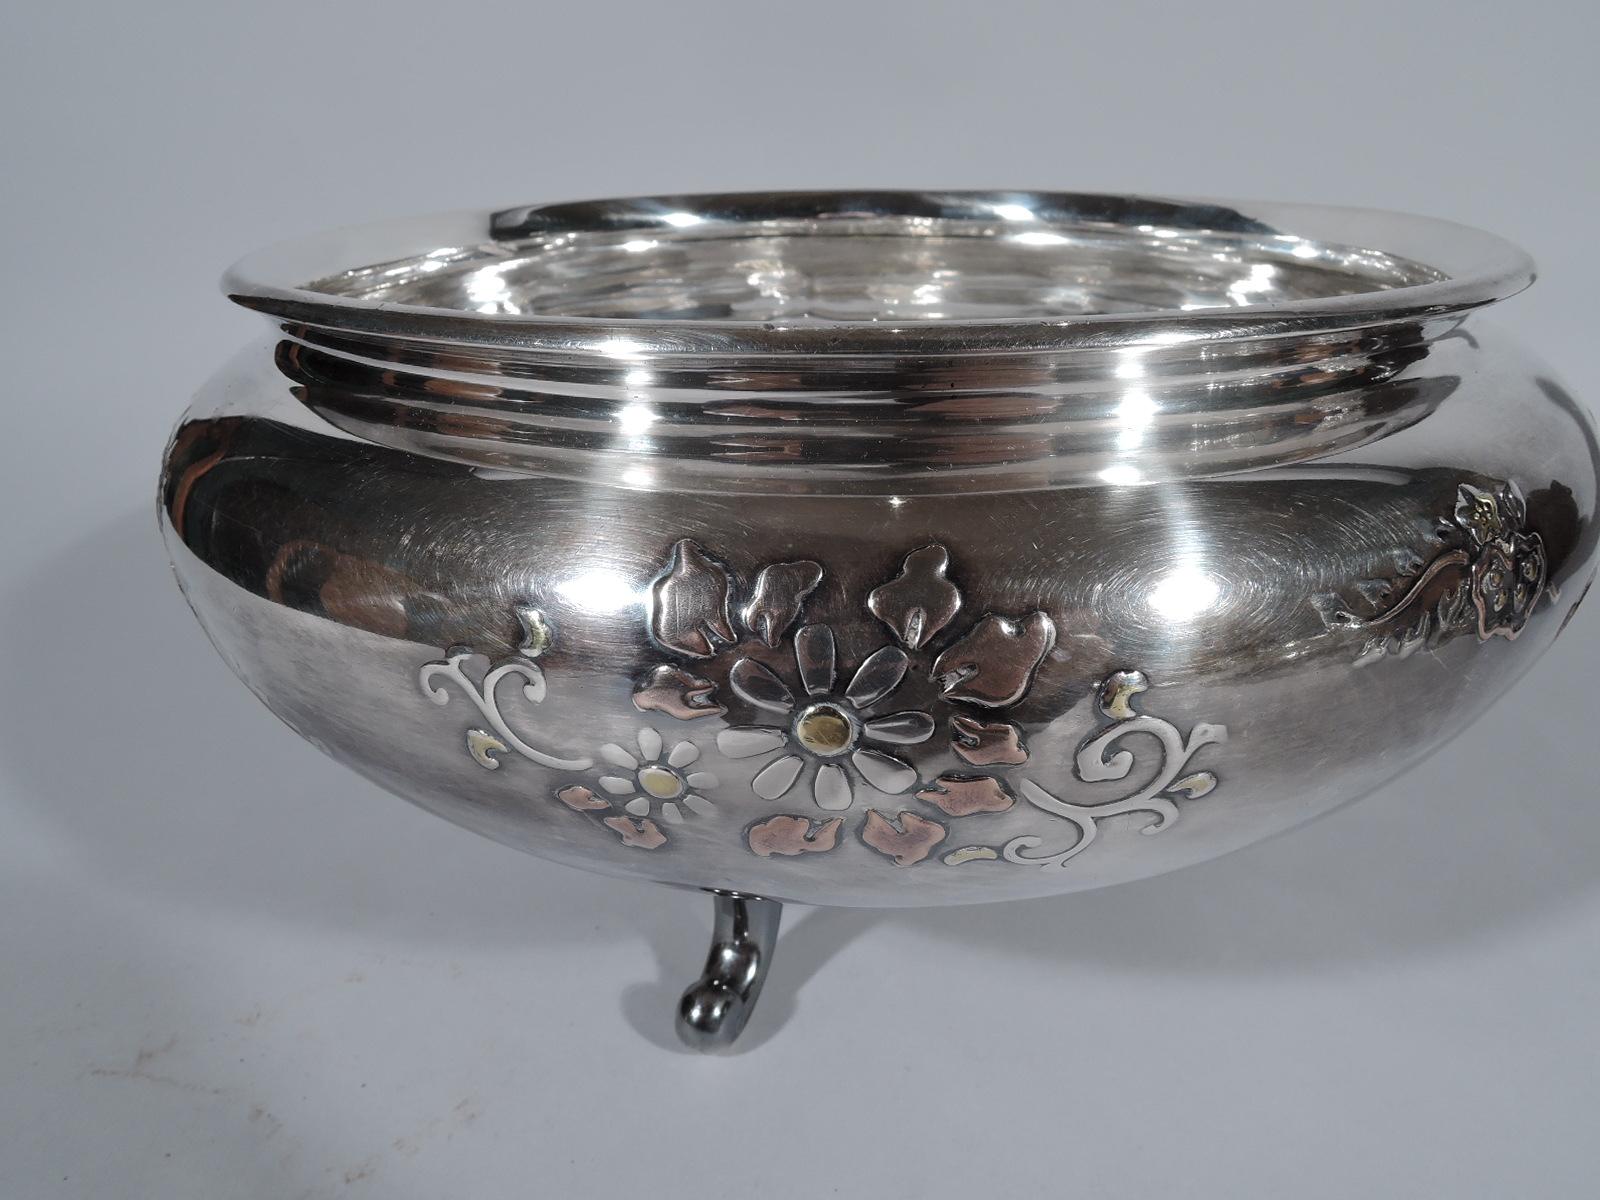 Meiji Antique Japanese Silver Bowl with Mixed Metal Flowers and Birds